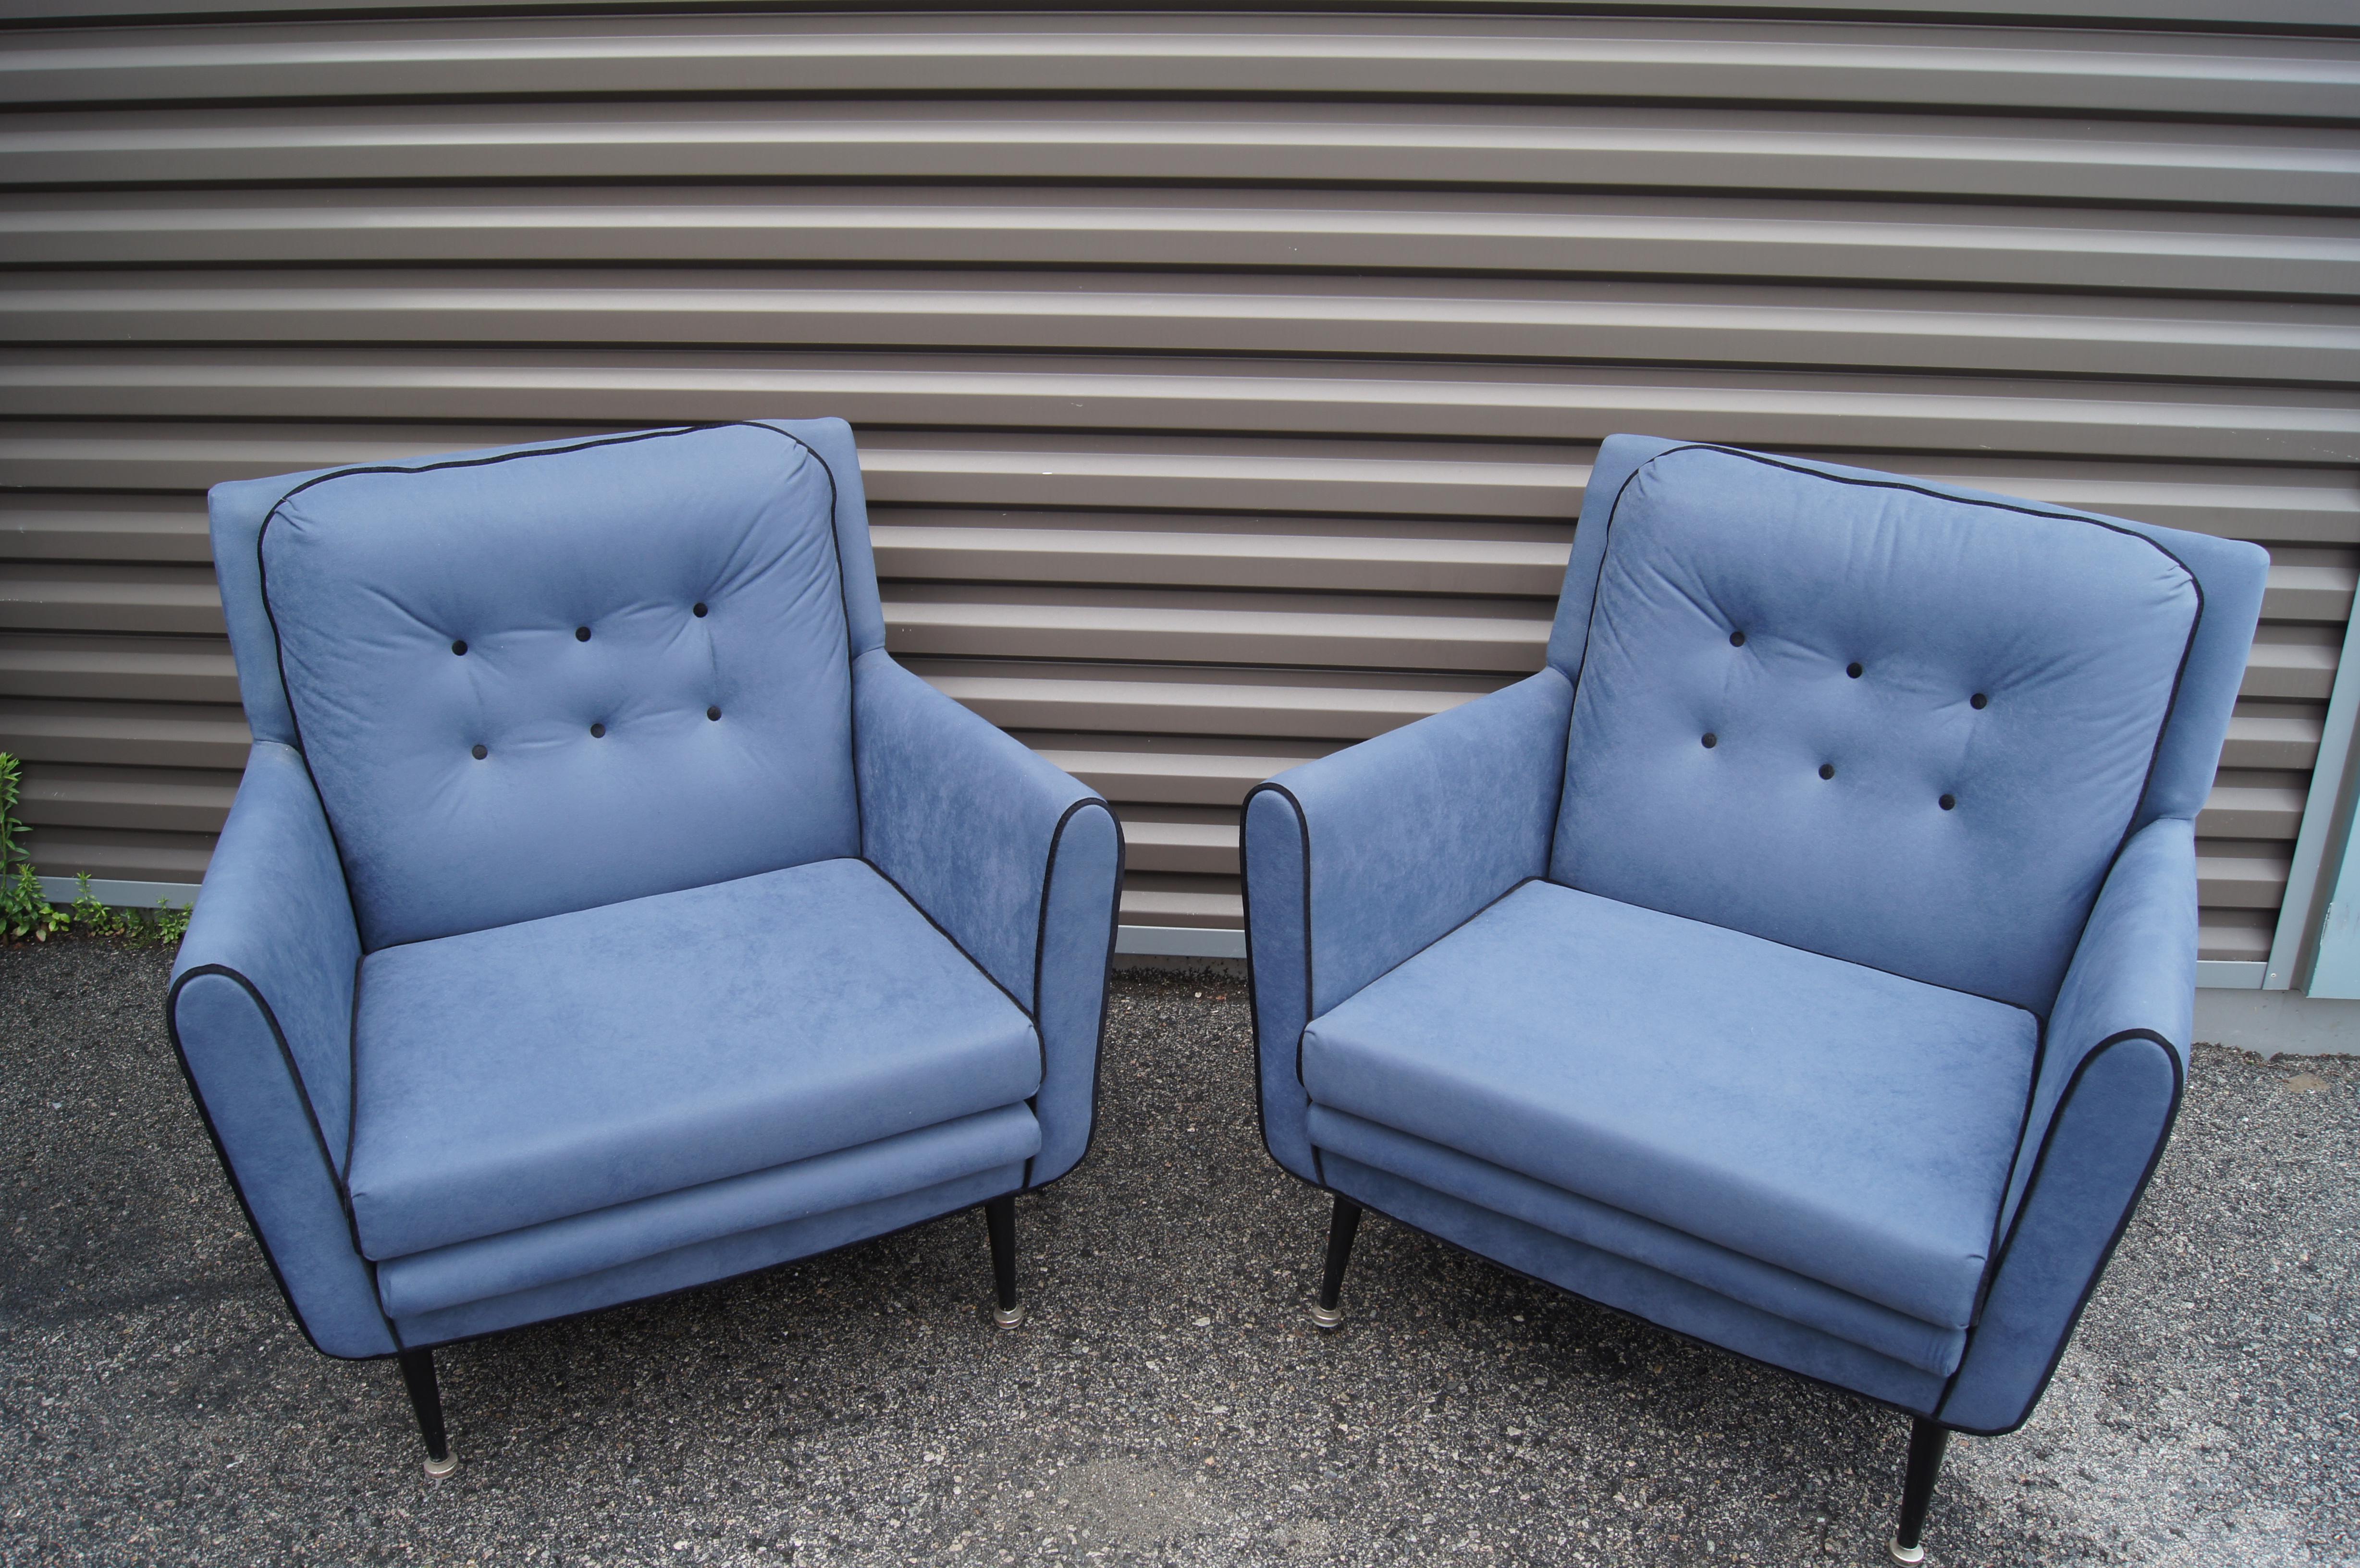 This pair of capacious lounge chairs features a distinctly American 1950s silhouette with tapered black metal legs and a tufted back cushion. The frames have been reupholstered in a soft blue microfiber with contrasting black piping.